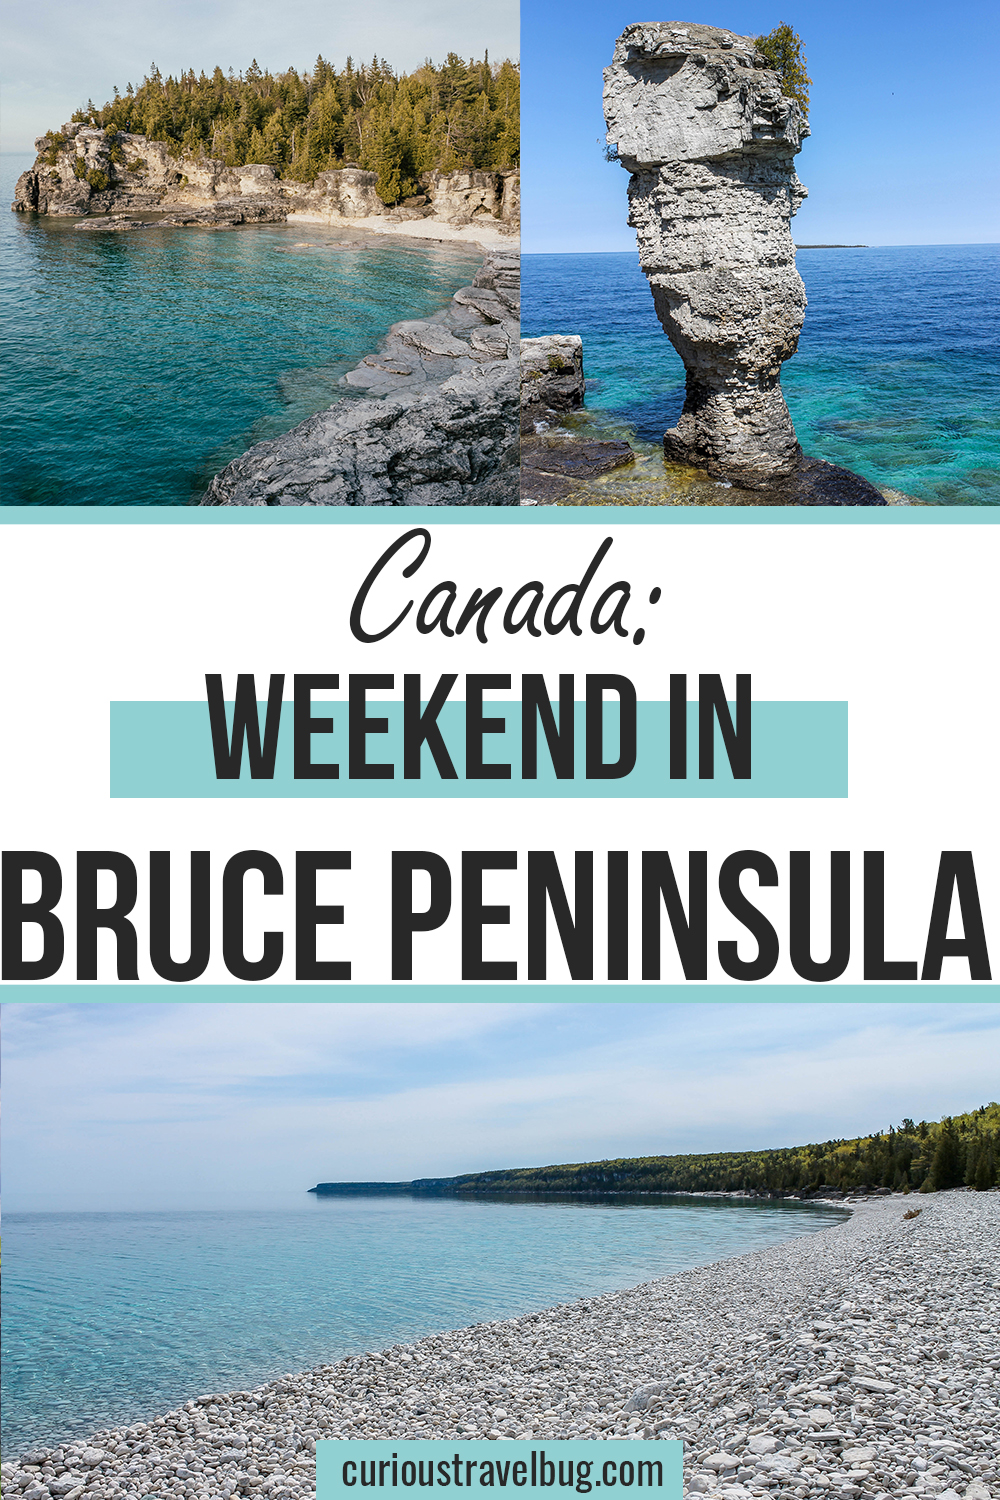 Everything you need to know to plan your weekend in the Bruce Peninsula National Park near Tobermory, Ontario Canada. You can visit the Bruce Peninsula as a day trip from Toronto but two days is better so you can see the grotto and Flowerpot Island. This is some of the most tropical-looking water in Ontario.